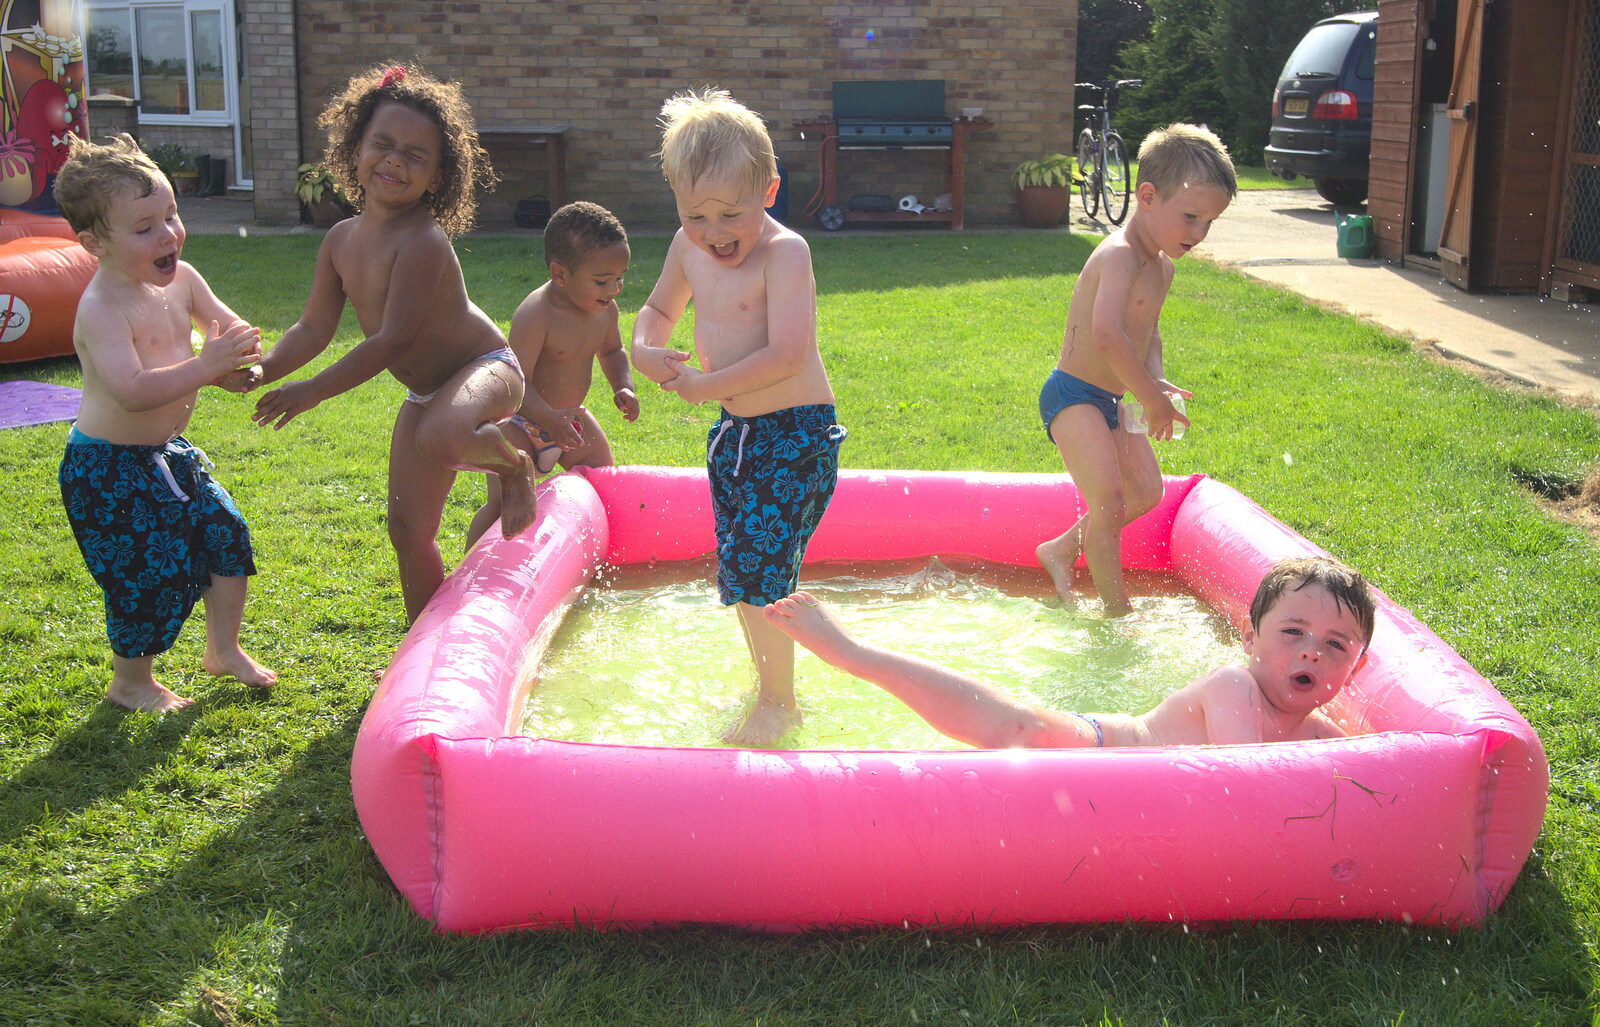 There's a whole pile of kids in the pool from "Grandma Julie's" Barbeque Thrash, Bressingham, Norfolk - 19th August 2012